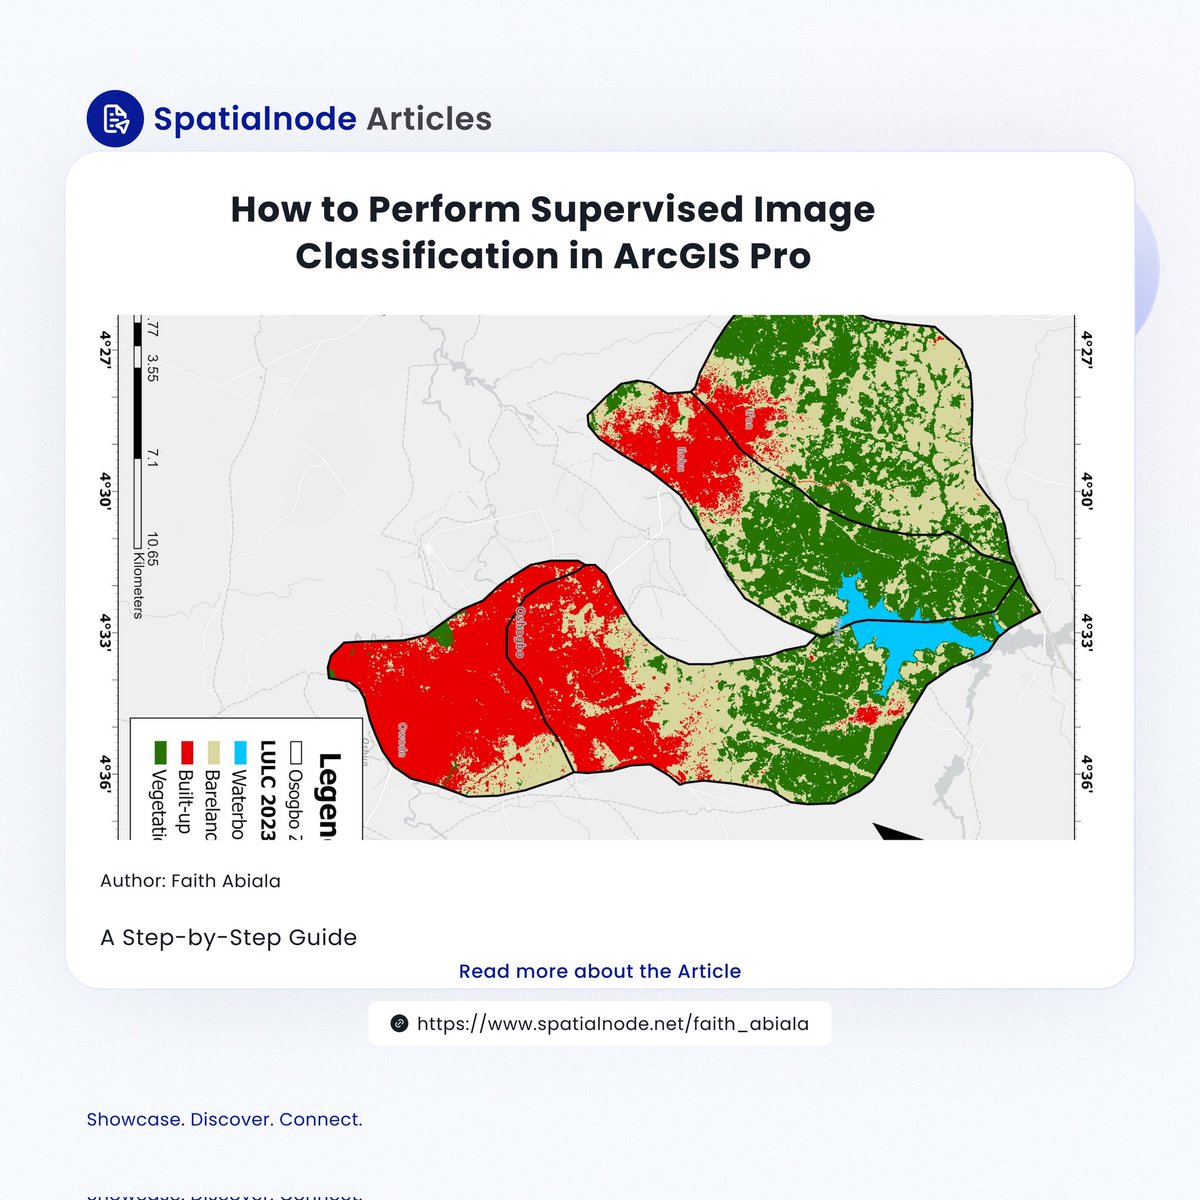 Do you struggle with performing Image Classification in ArcGIS Pro? 

This article is a step-by-step guide on how to perform a supervised image classification in ArcGIS Pro.

Learn here: spatialnode.net/articles/how-t…

#imageclassification #geospatial #gis